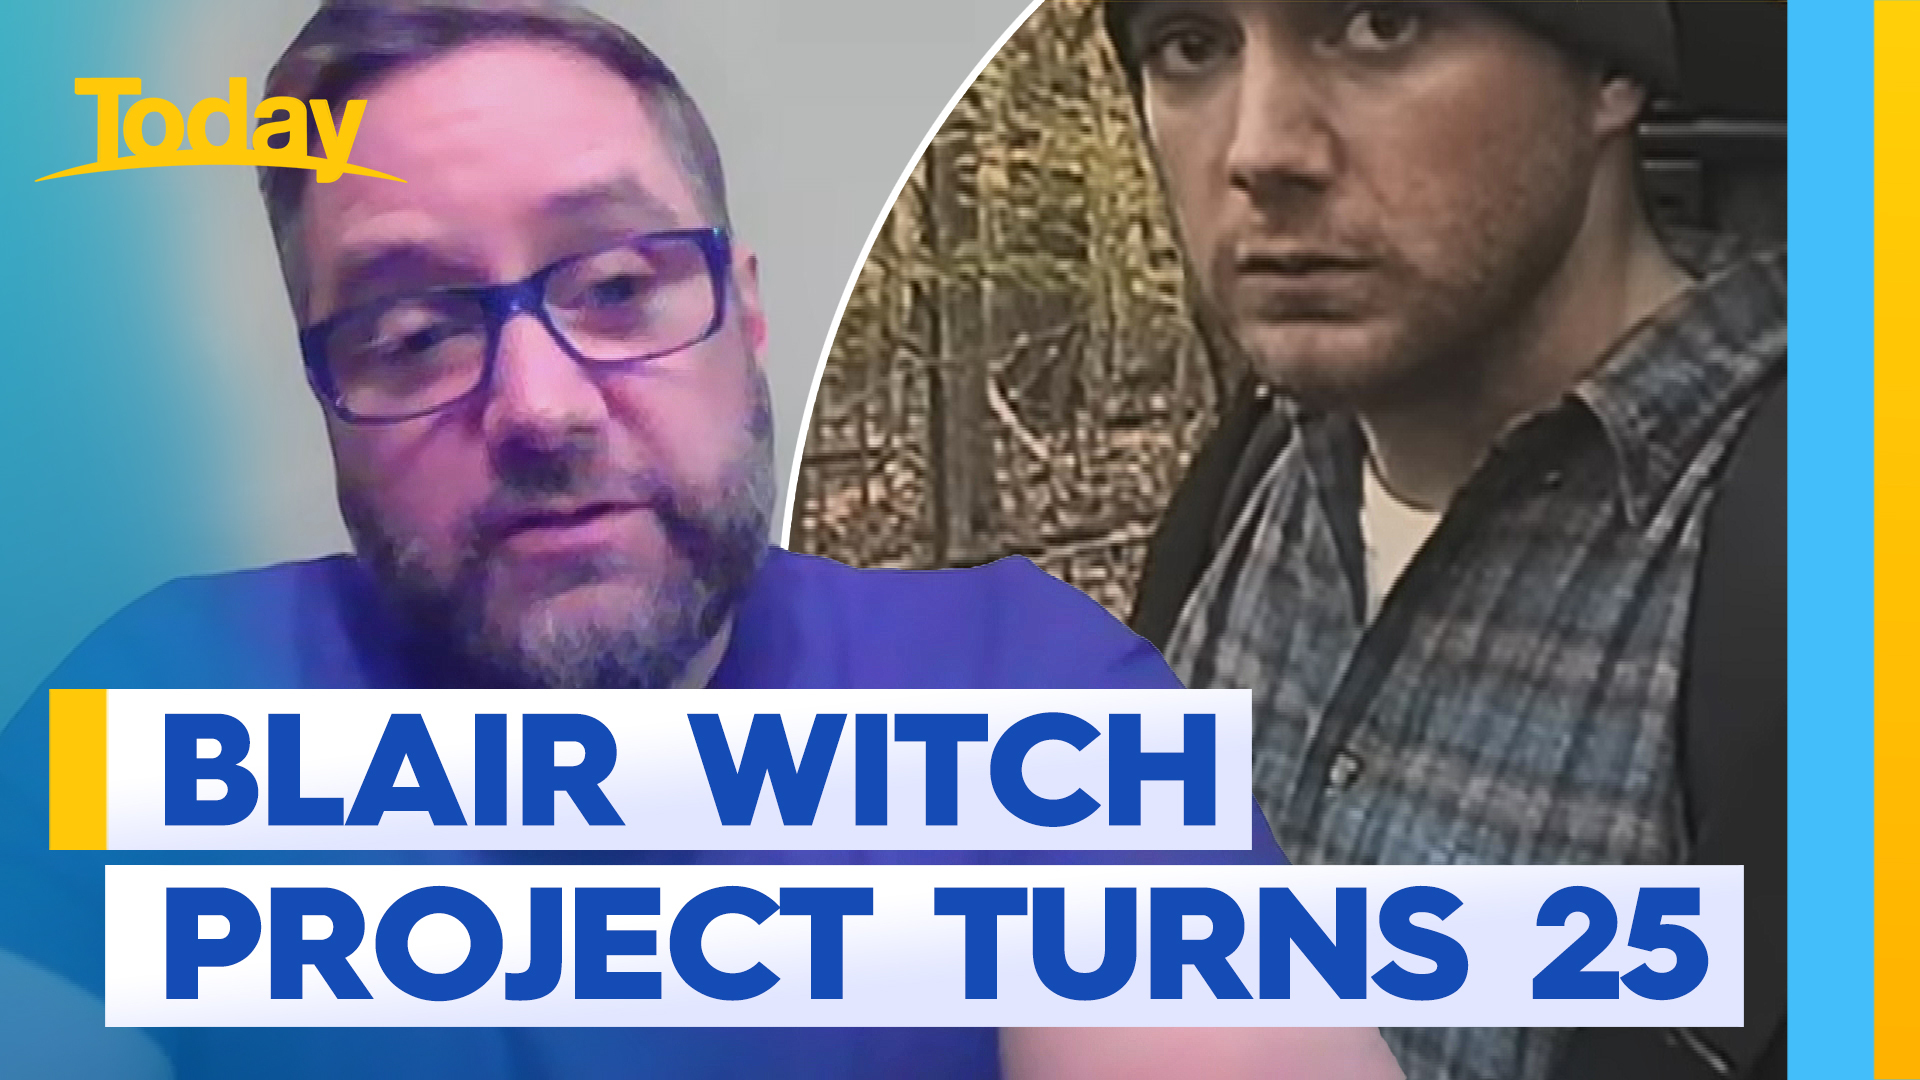 The Blair Witch Project 25 years on